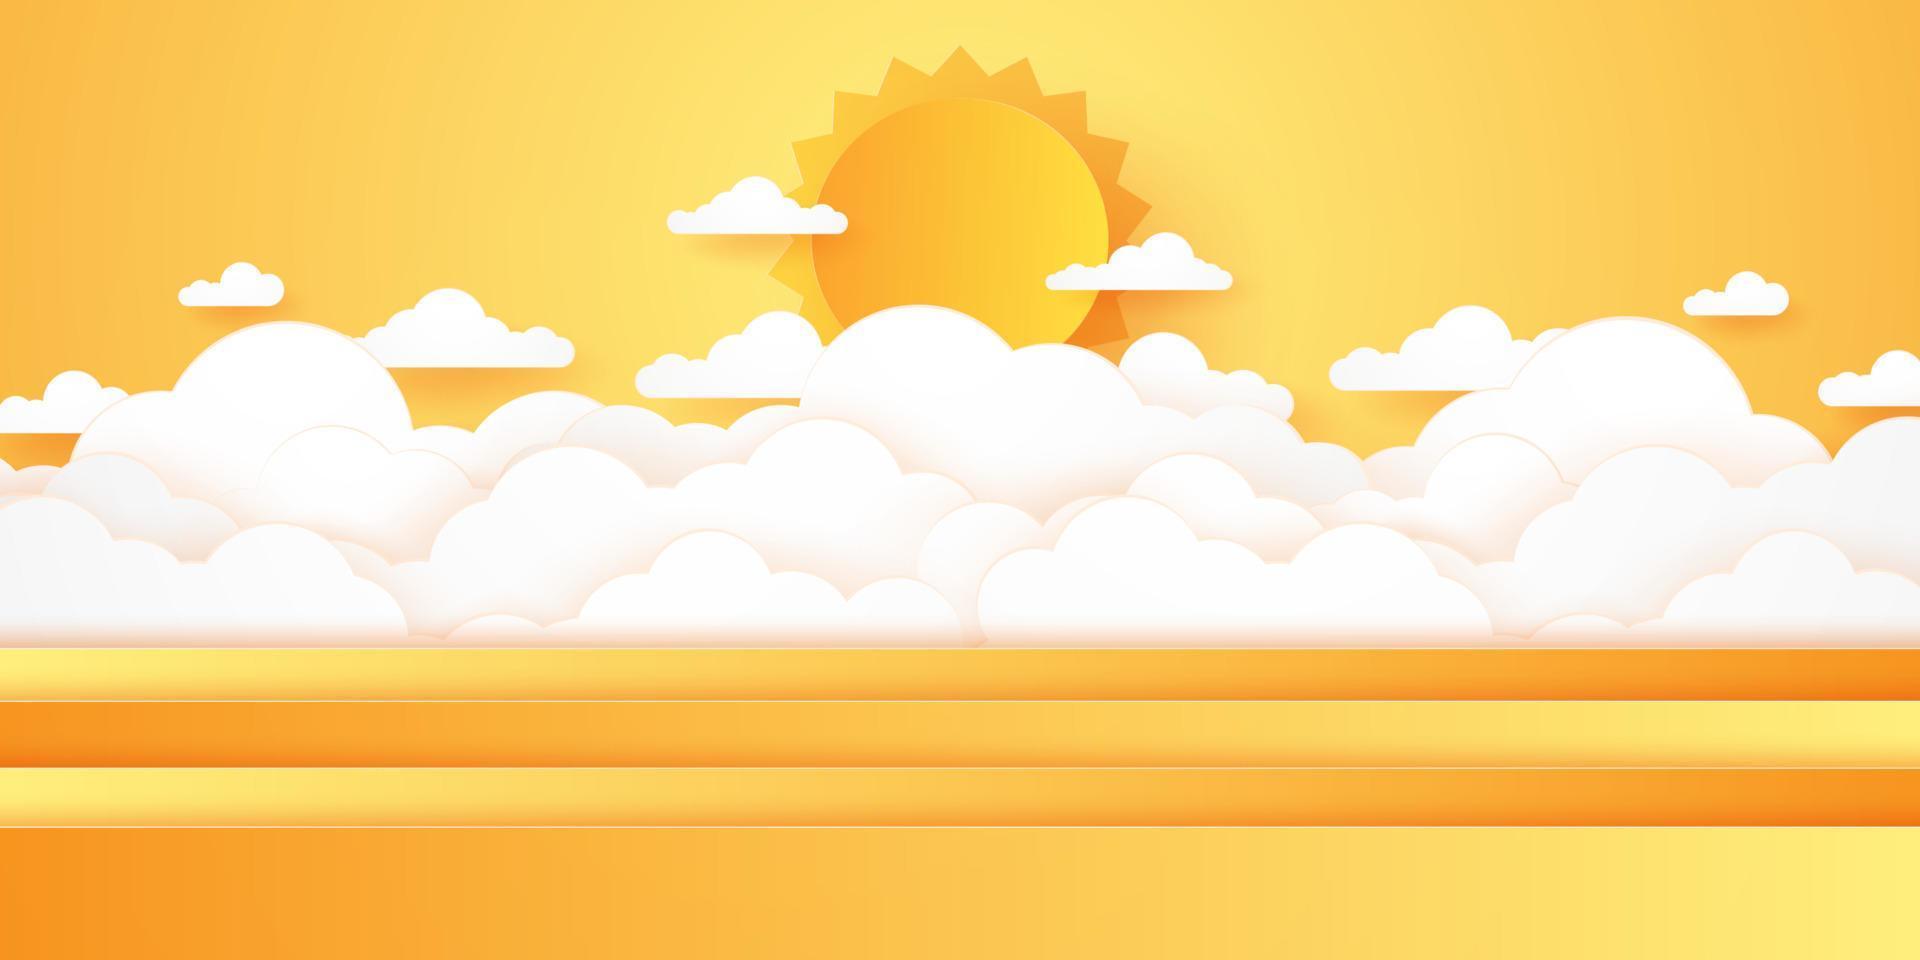 Summer Time, Cloudscape, cloudy sky with bright sun, paper art style vector